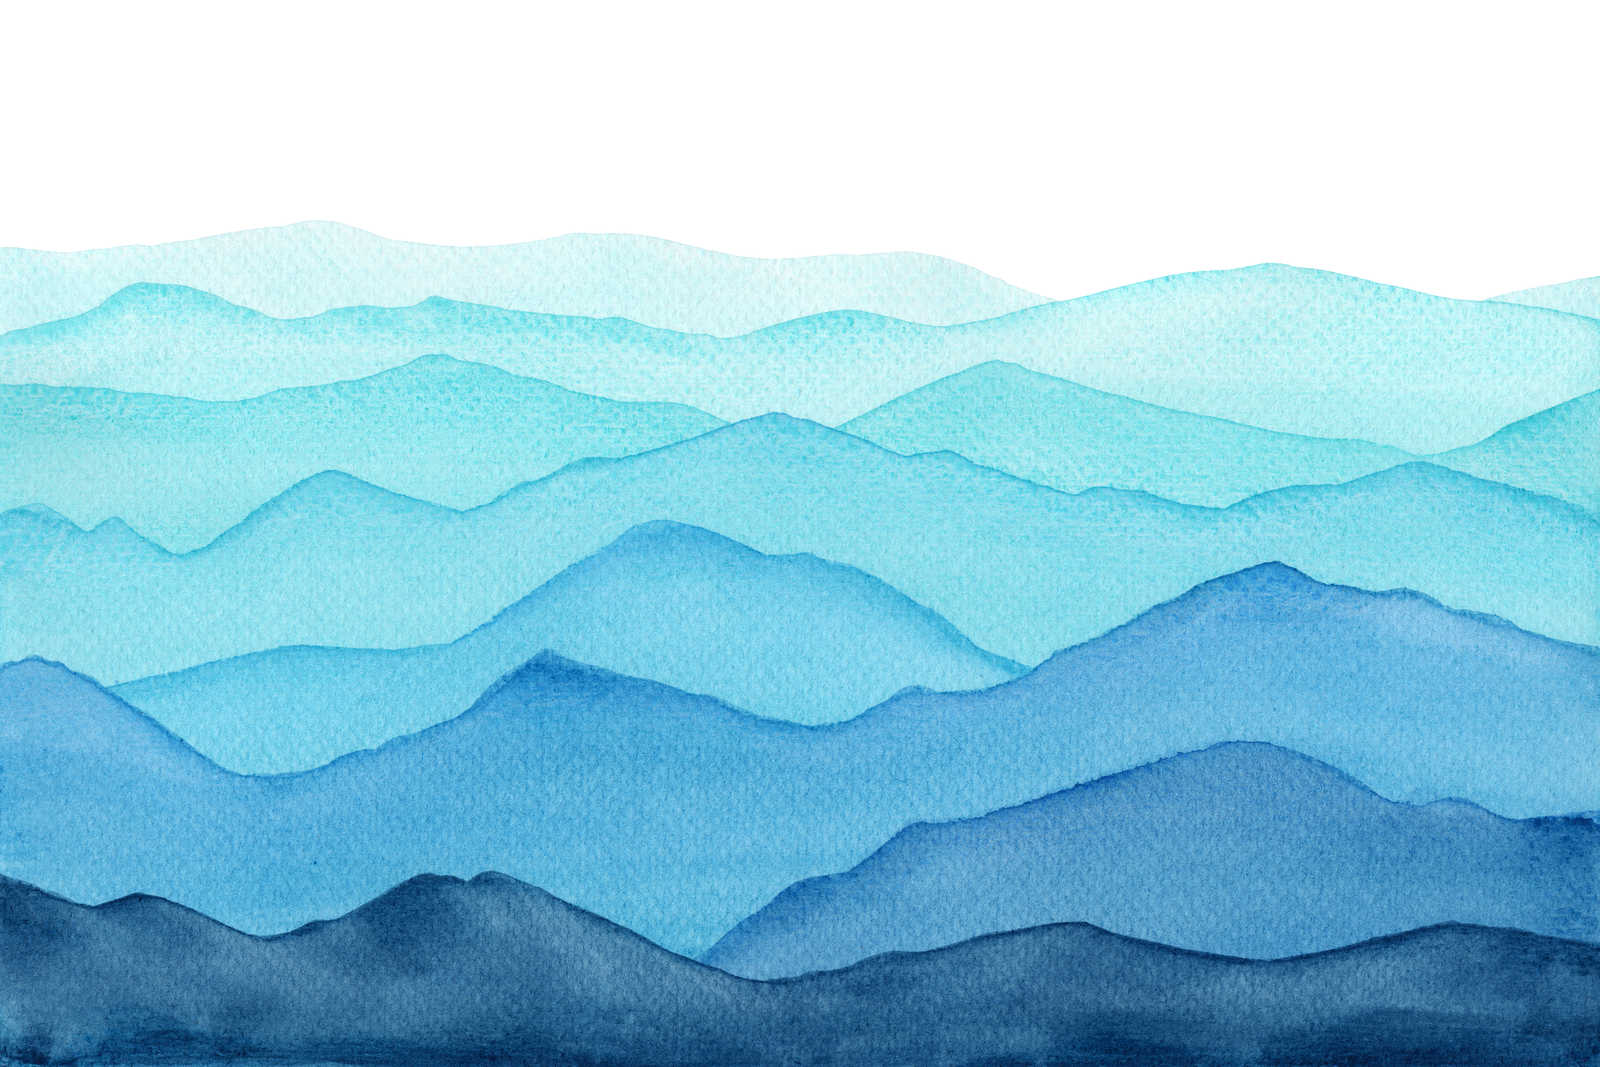             Canvas Sea with waves in watercolour - 120 cm x 80 cm
        